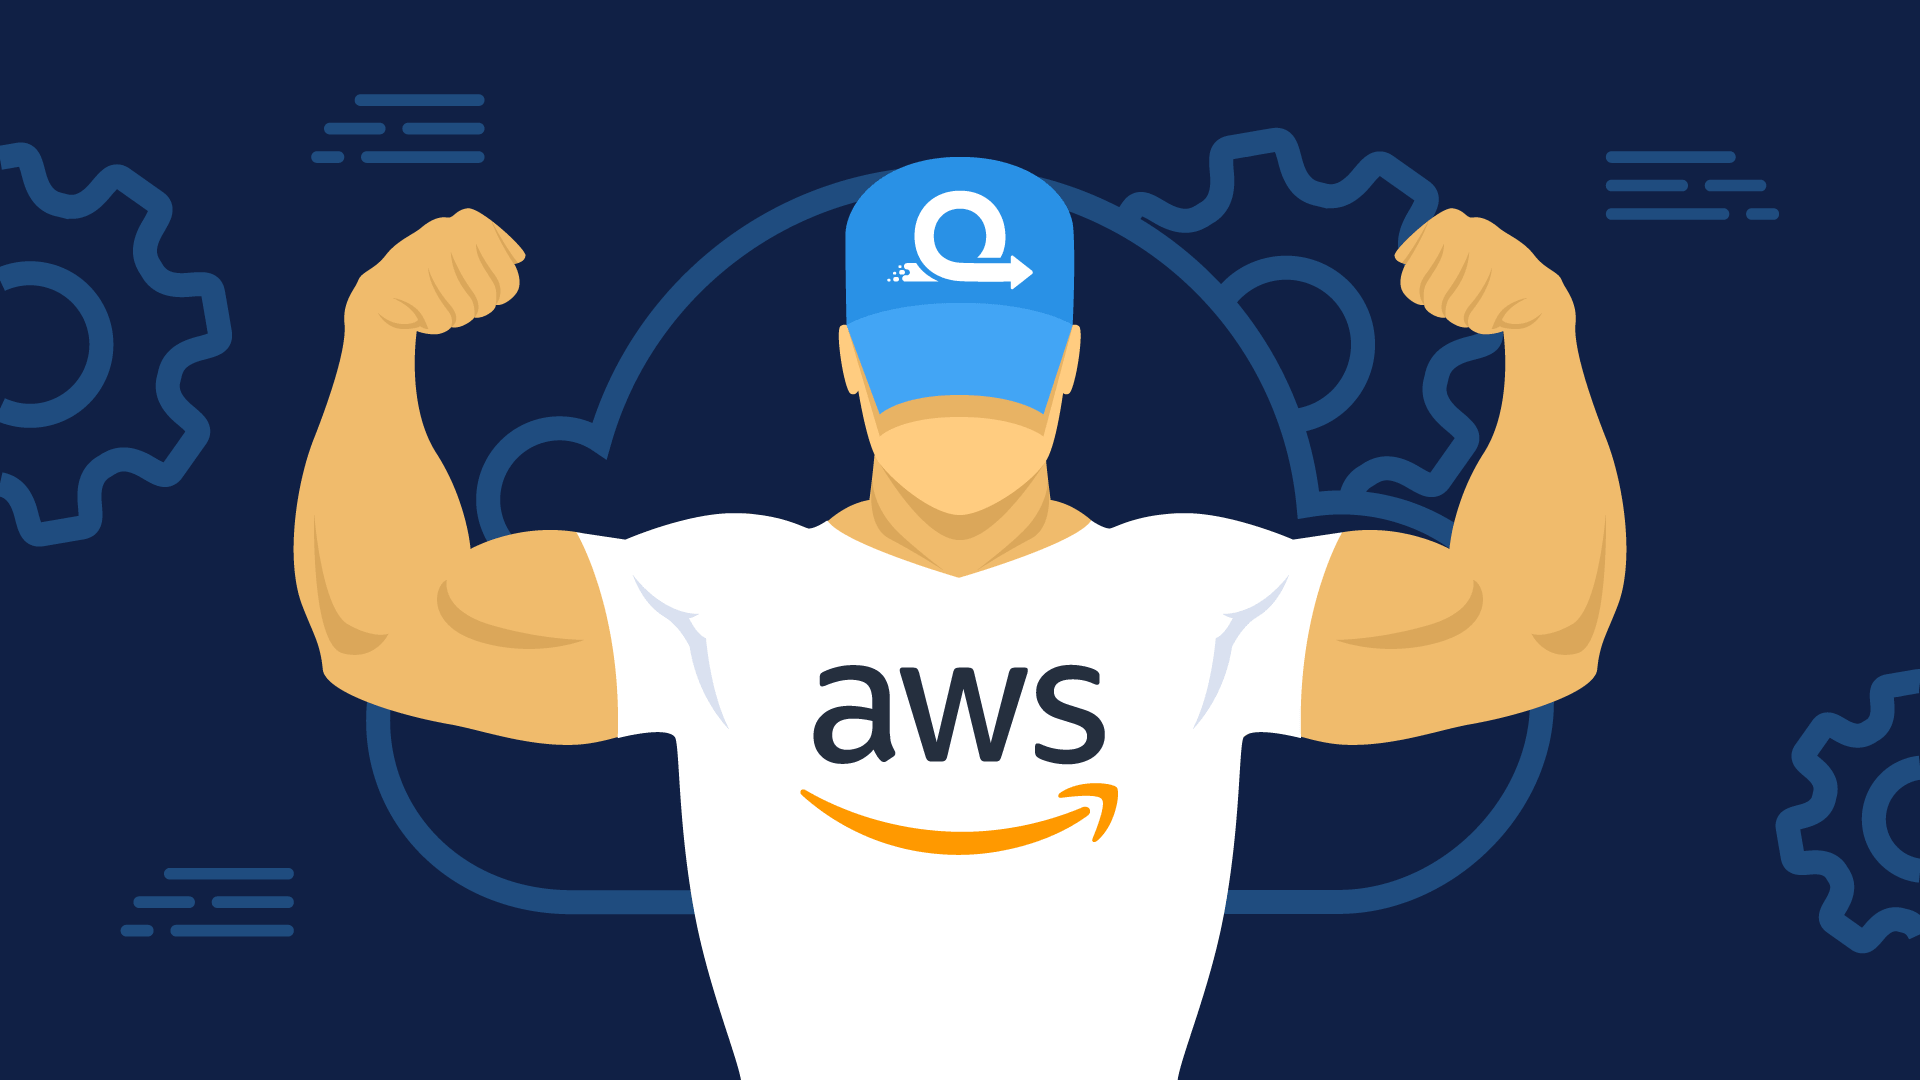 AgileVision straightens its expertise with AWS Professional Certifications